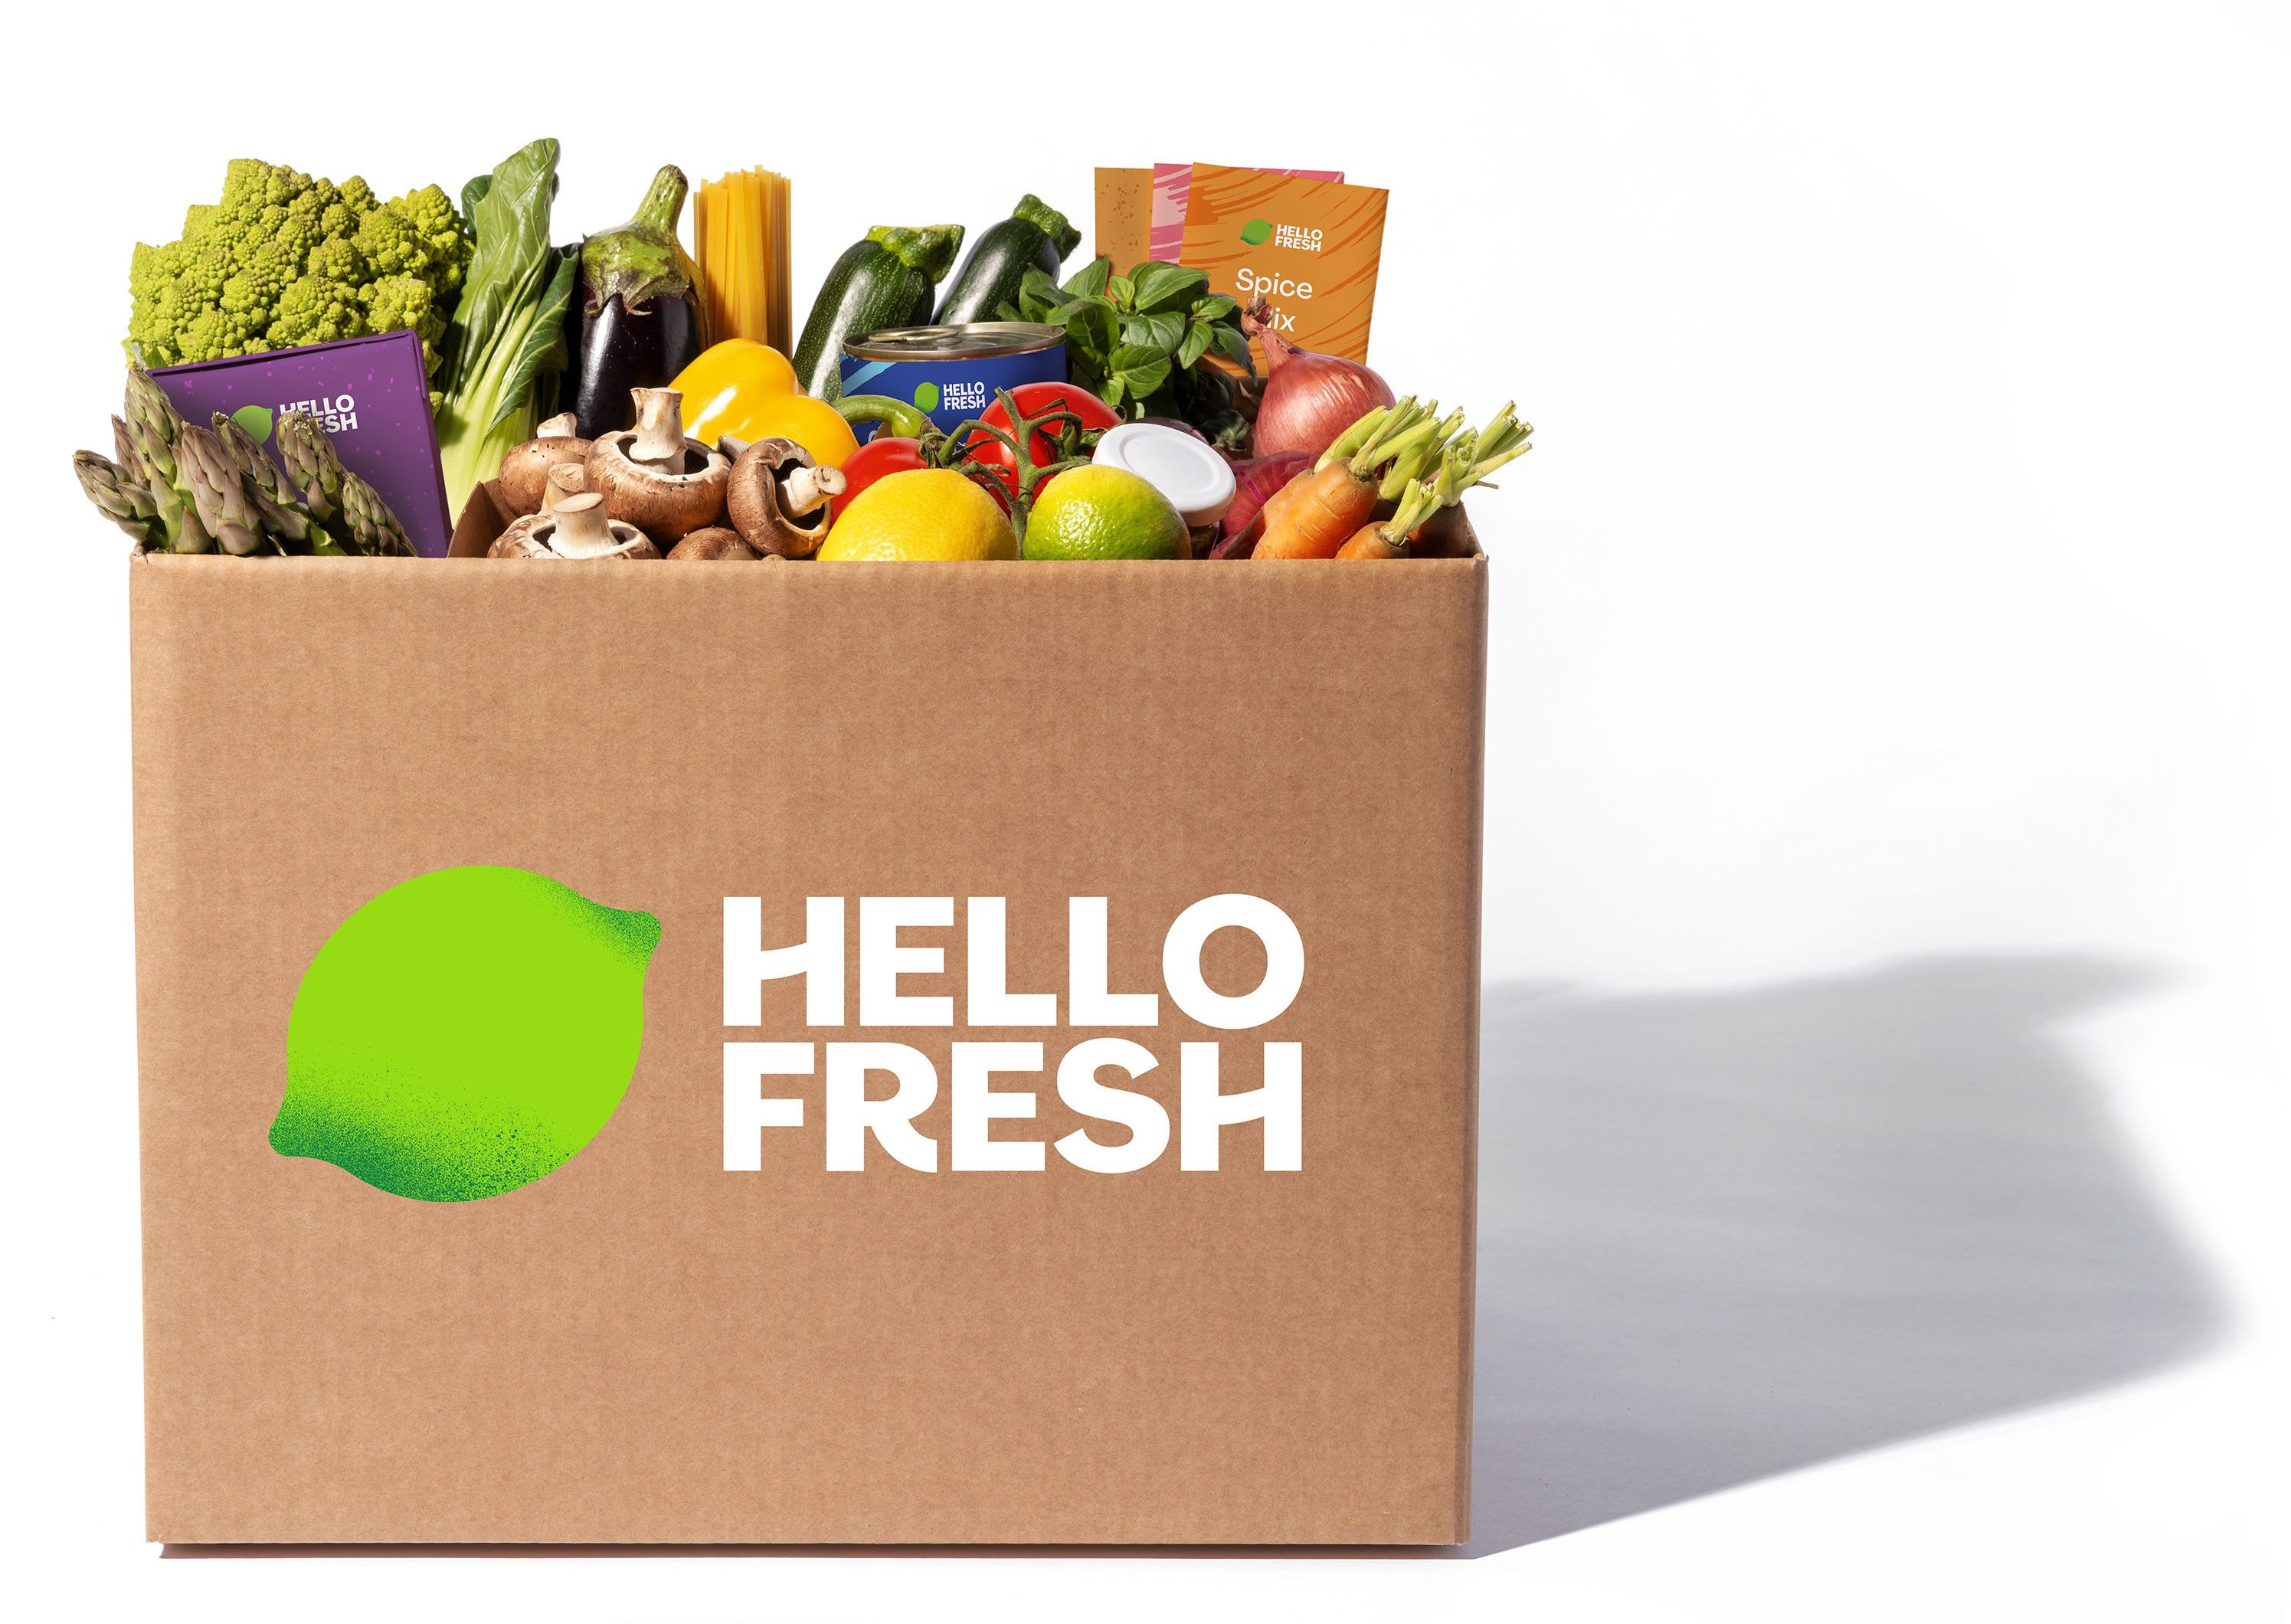 <h2>Does HelloFresh deliver to my area?</h2>